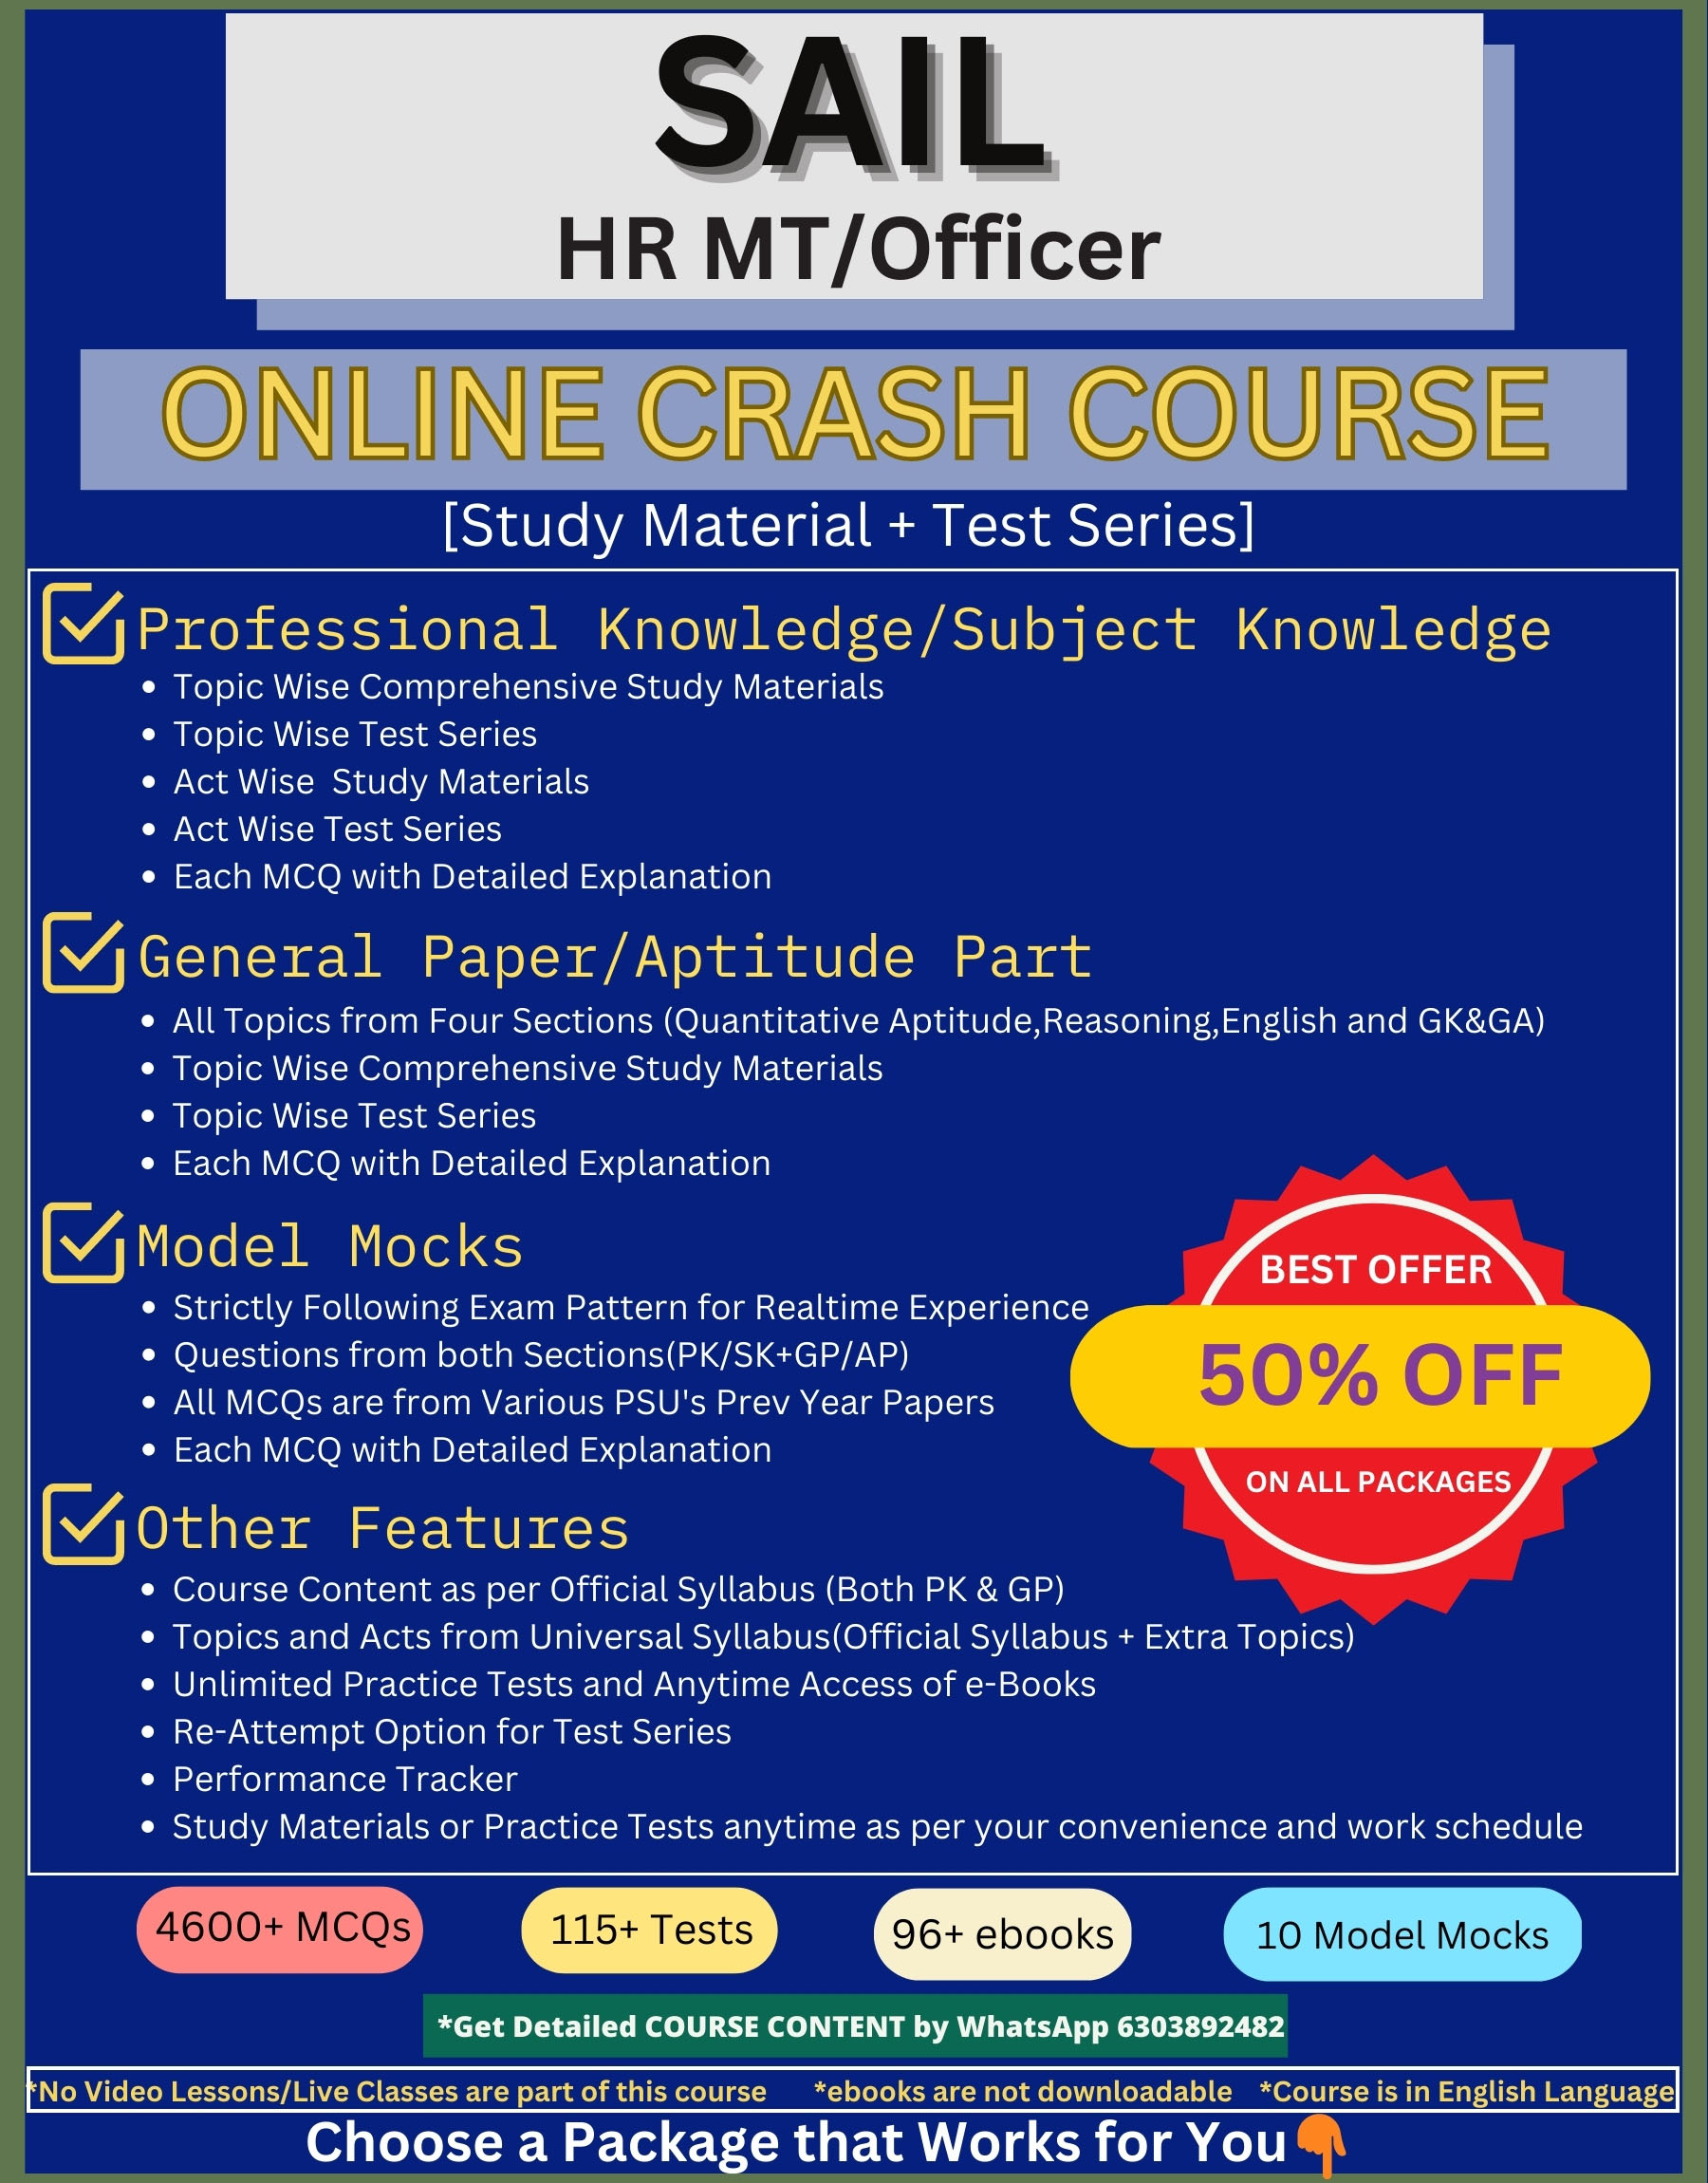 Online course with test series and study materials for steel authority of India SAIL MT HR